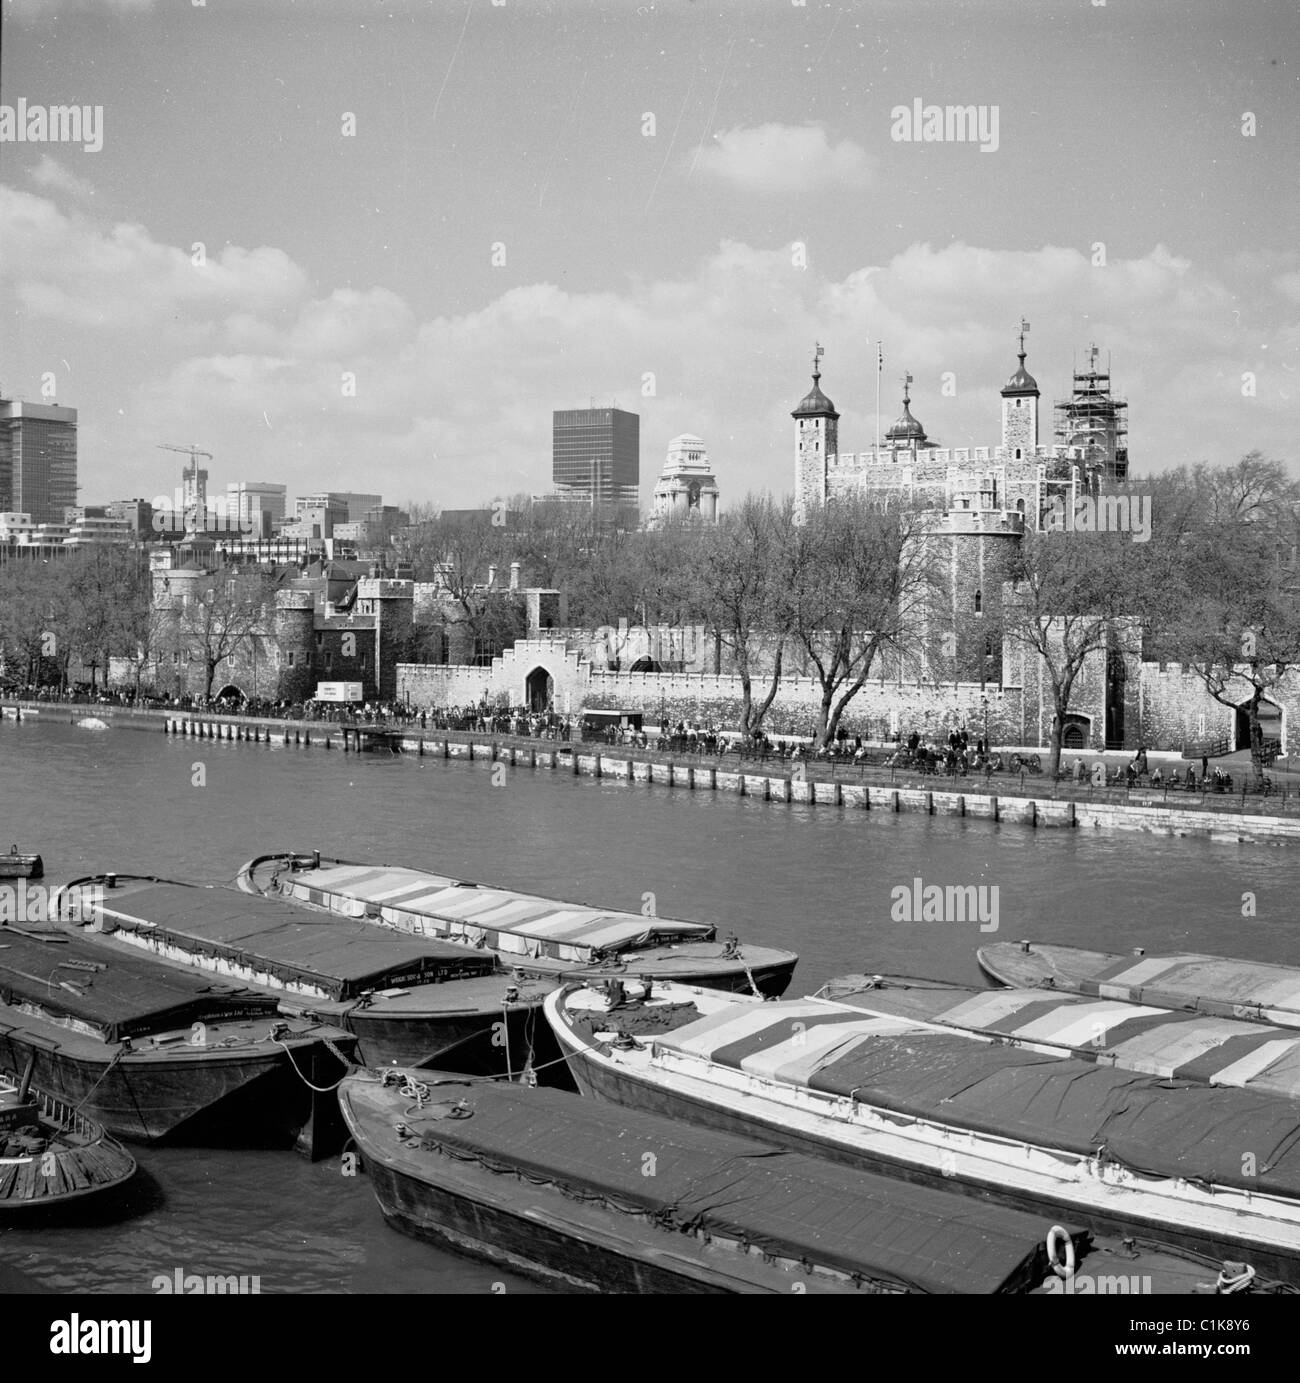 1950s, view across River Thames showing the famous landmark, the Tower of London, a fortress dating back to 1078 and home to the British Crown Jewels. Stock Photo